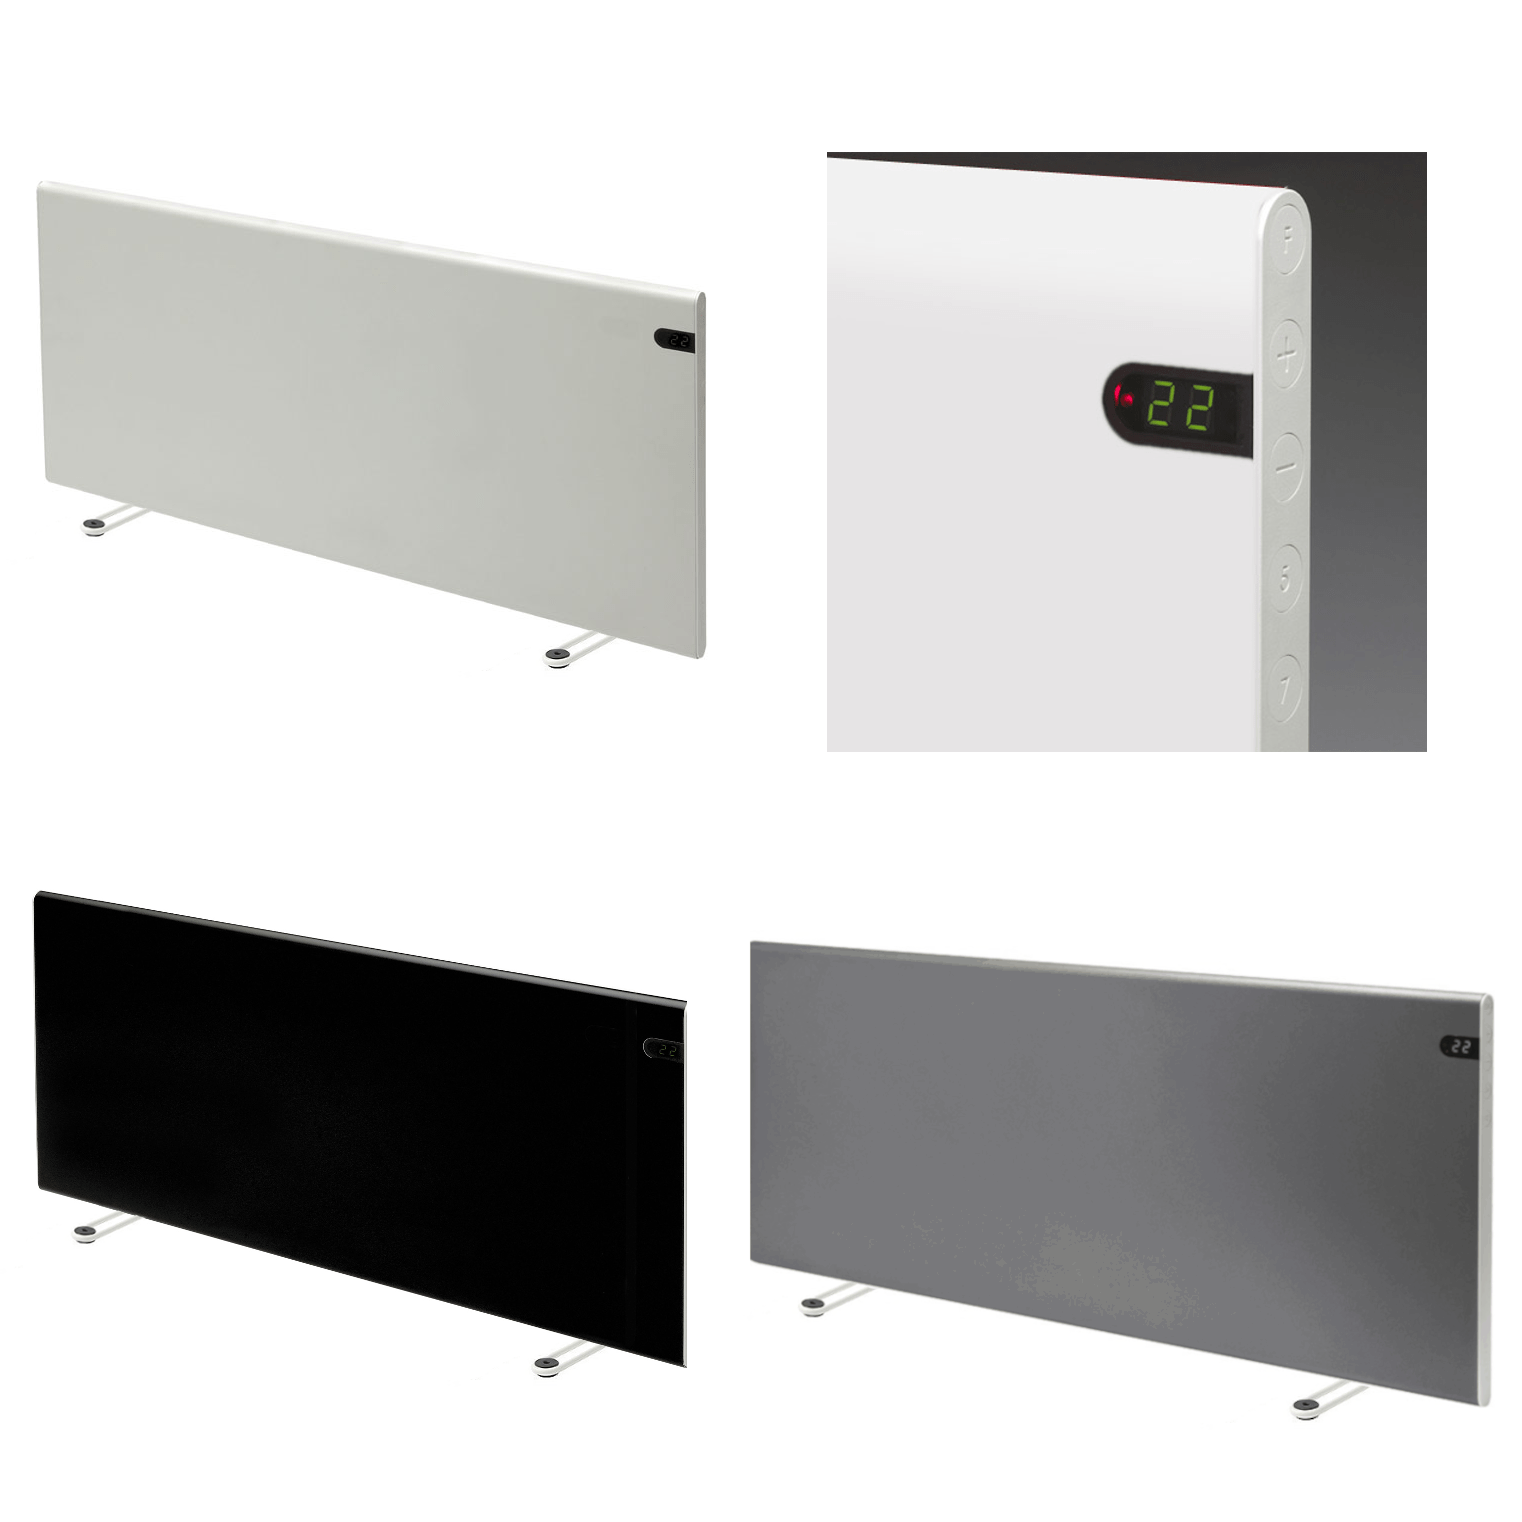 ADAX Neo Modern Portable Electric Heater, Thermostat, Timer Modern, Stylish Heating Products For Sale. Great Deals Buy Online From Richmond Radiators UK Shop 2